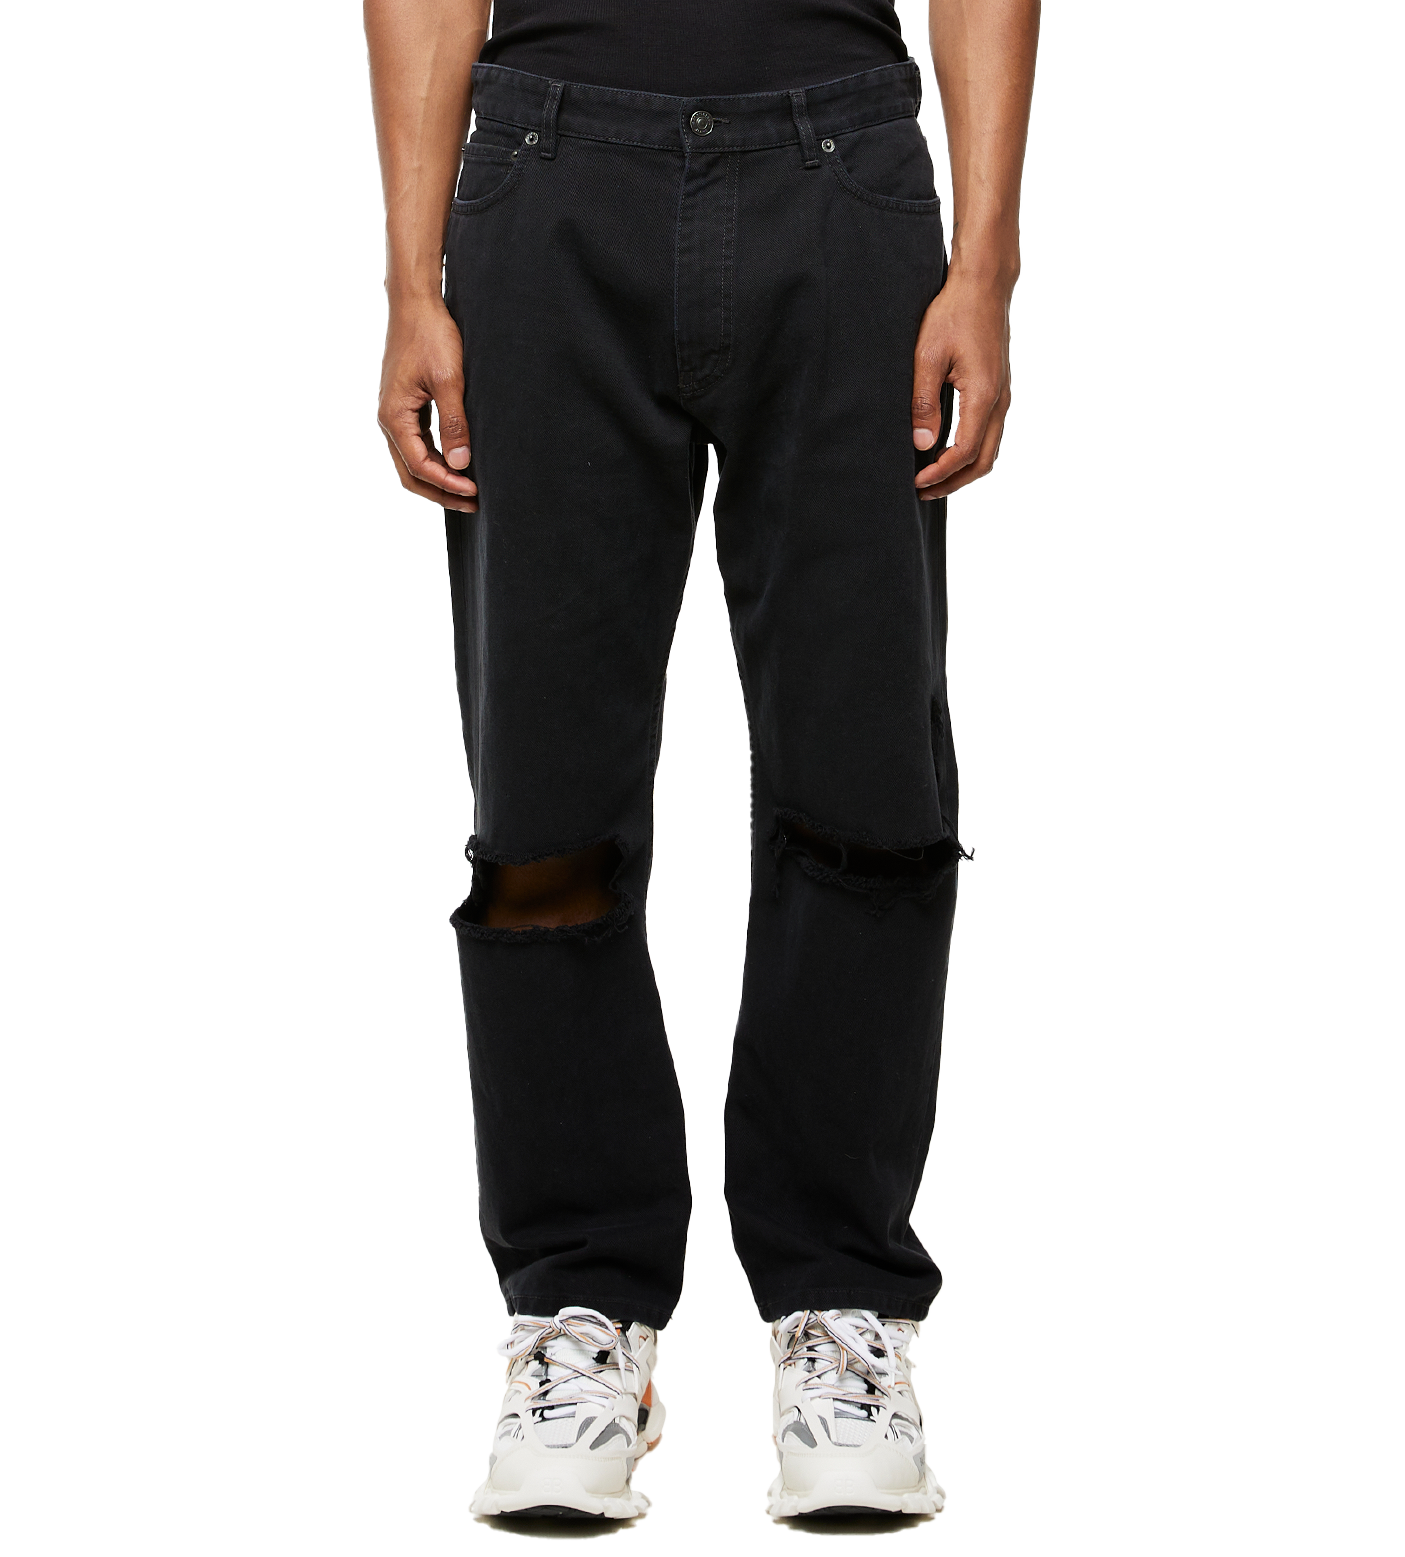 Buckle Busted Knee Jeans Black